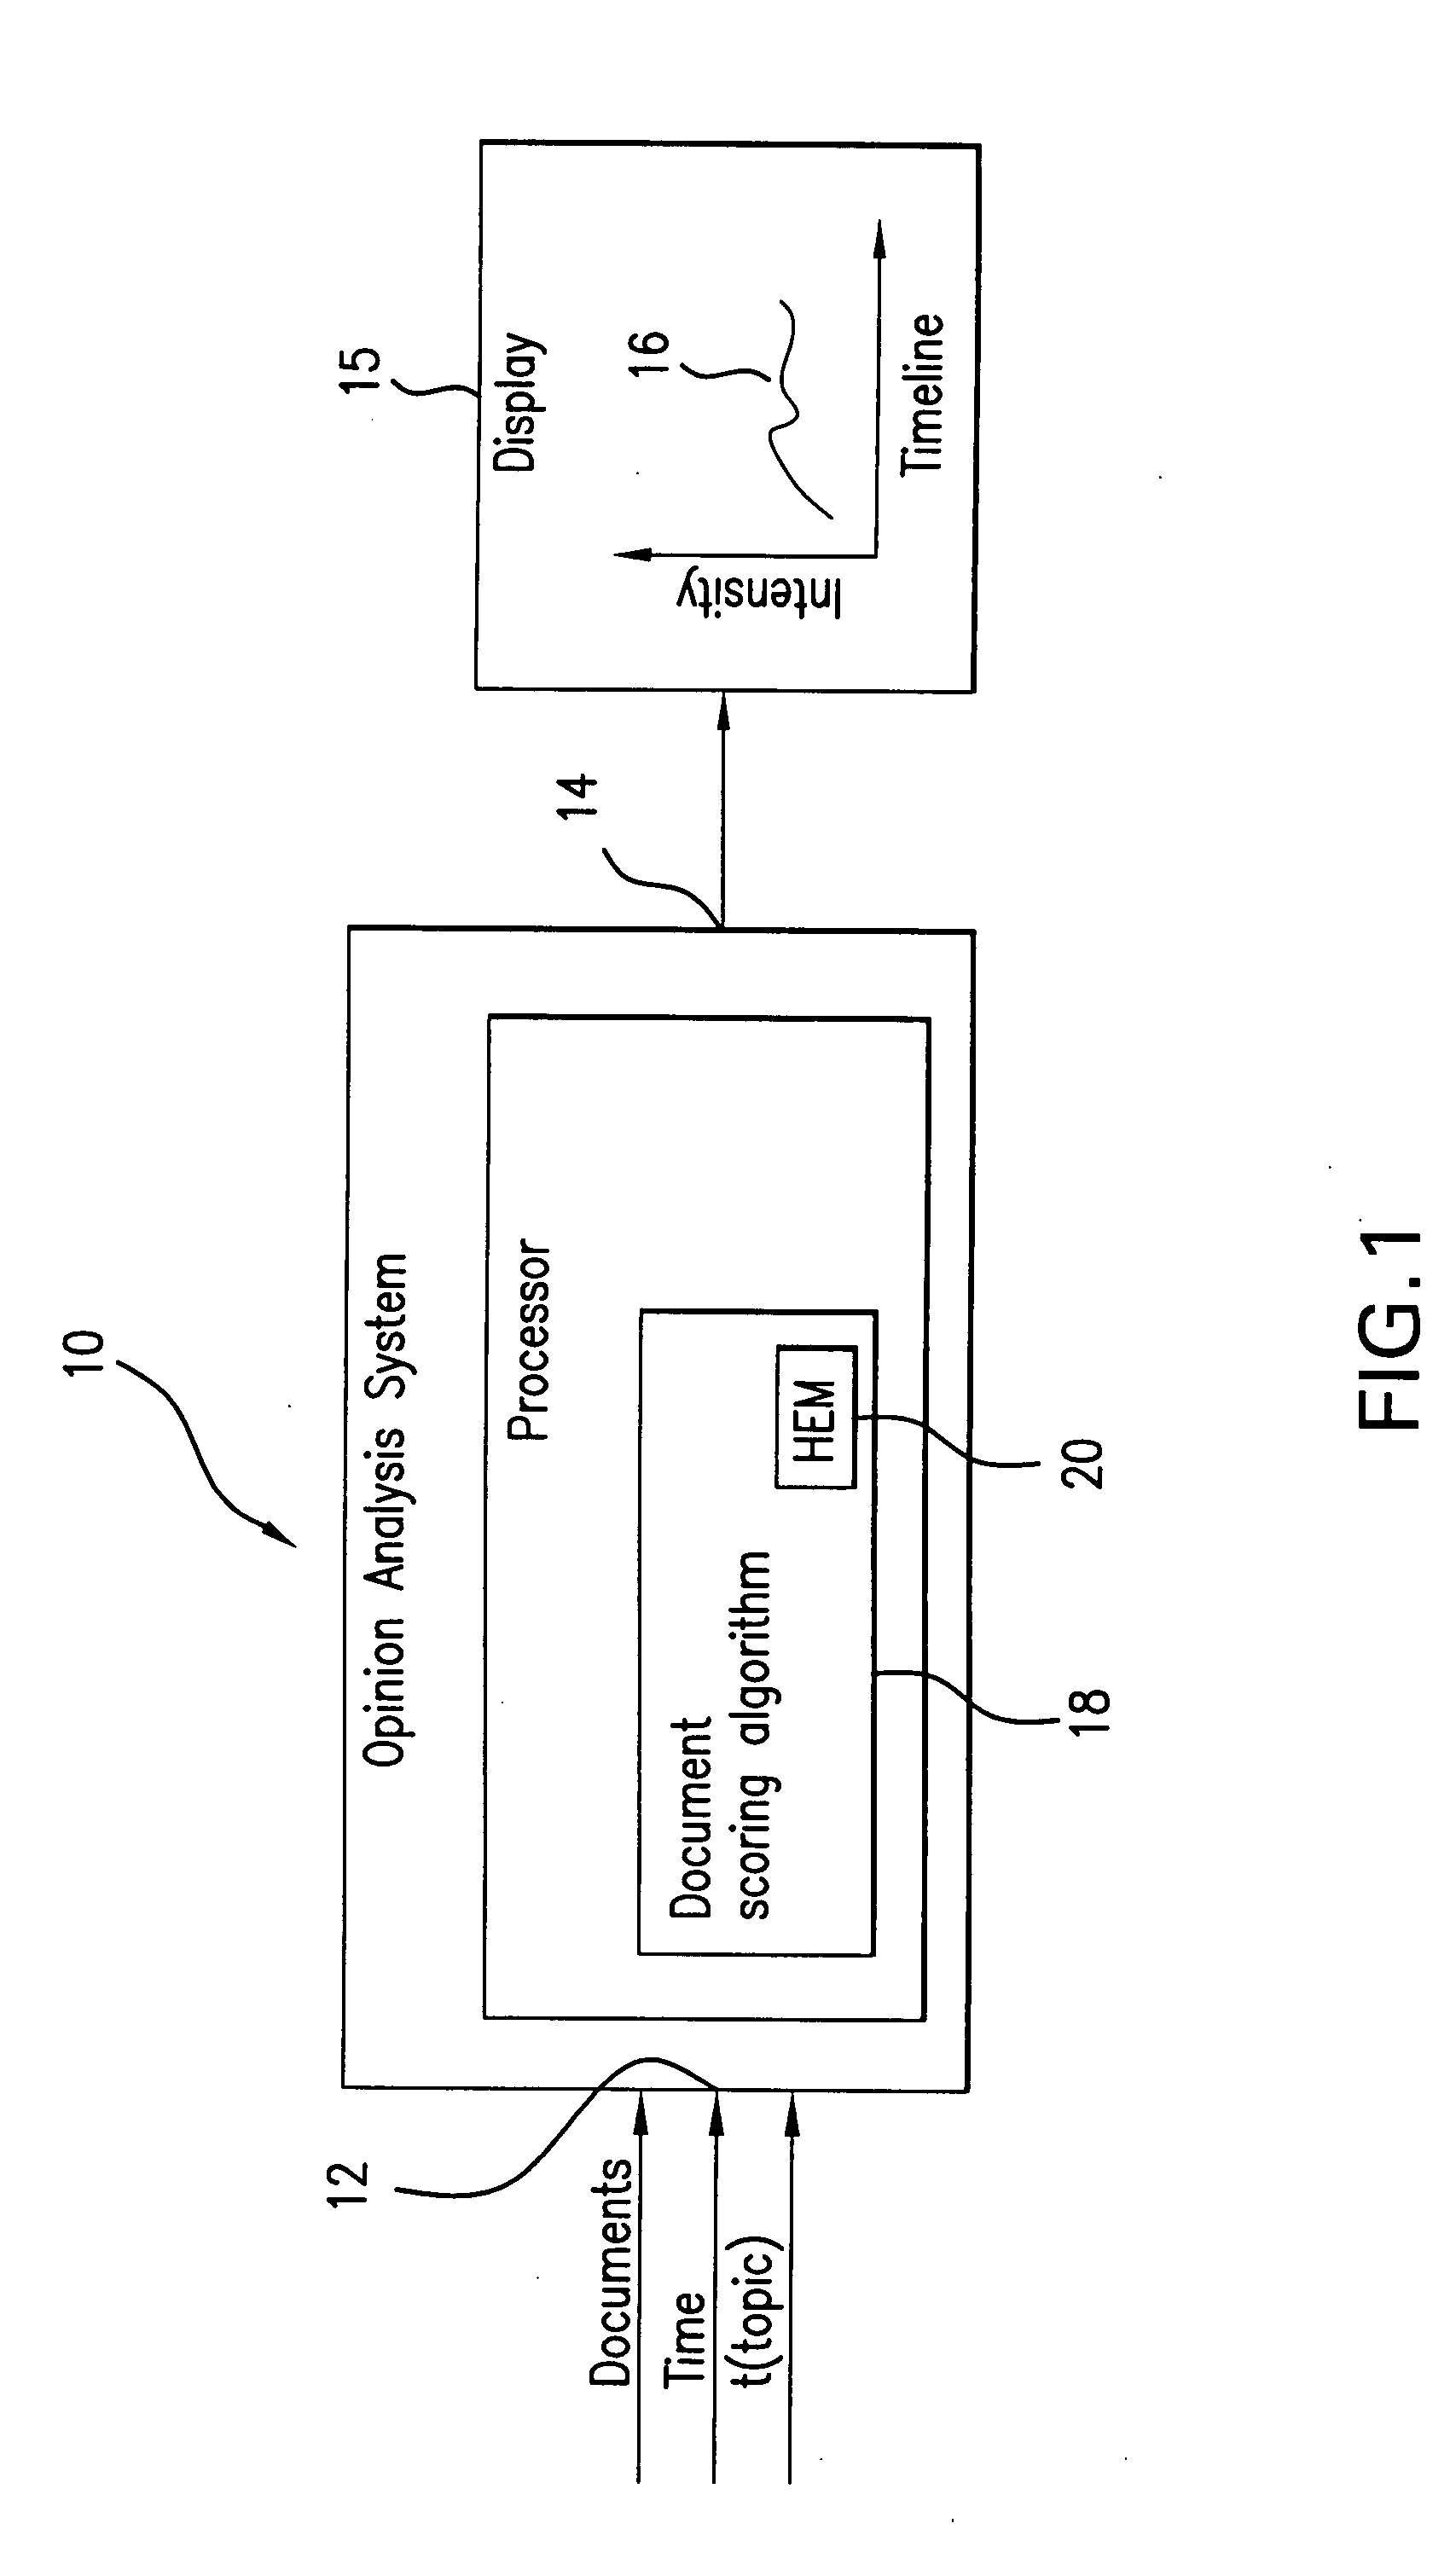 System and method for analysis of an opinion expressed in documents with regard to a particular topic